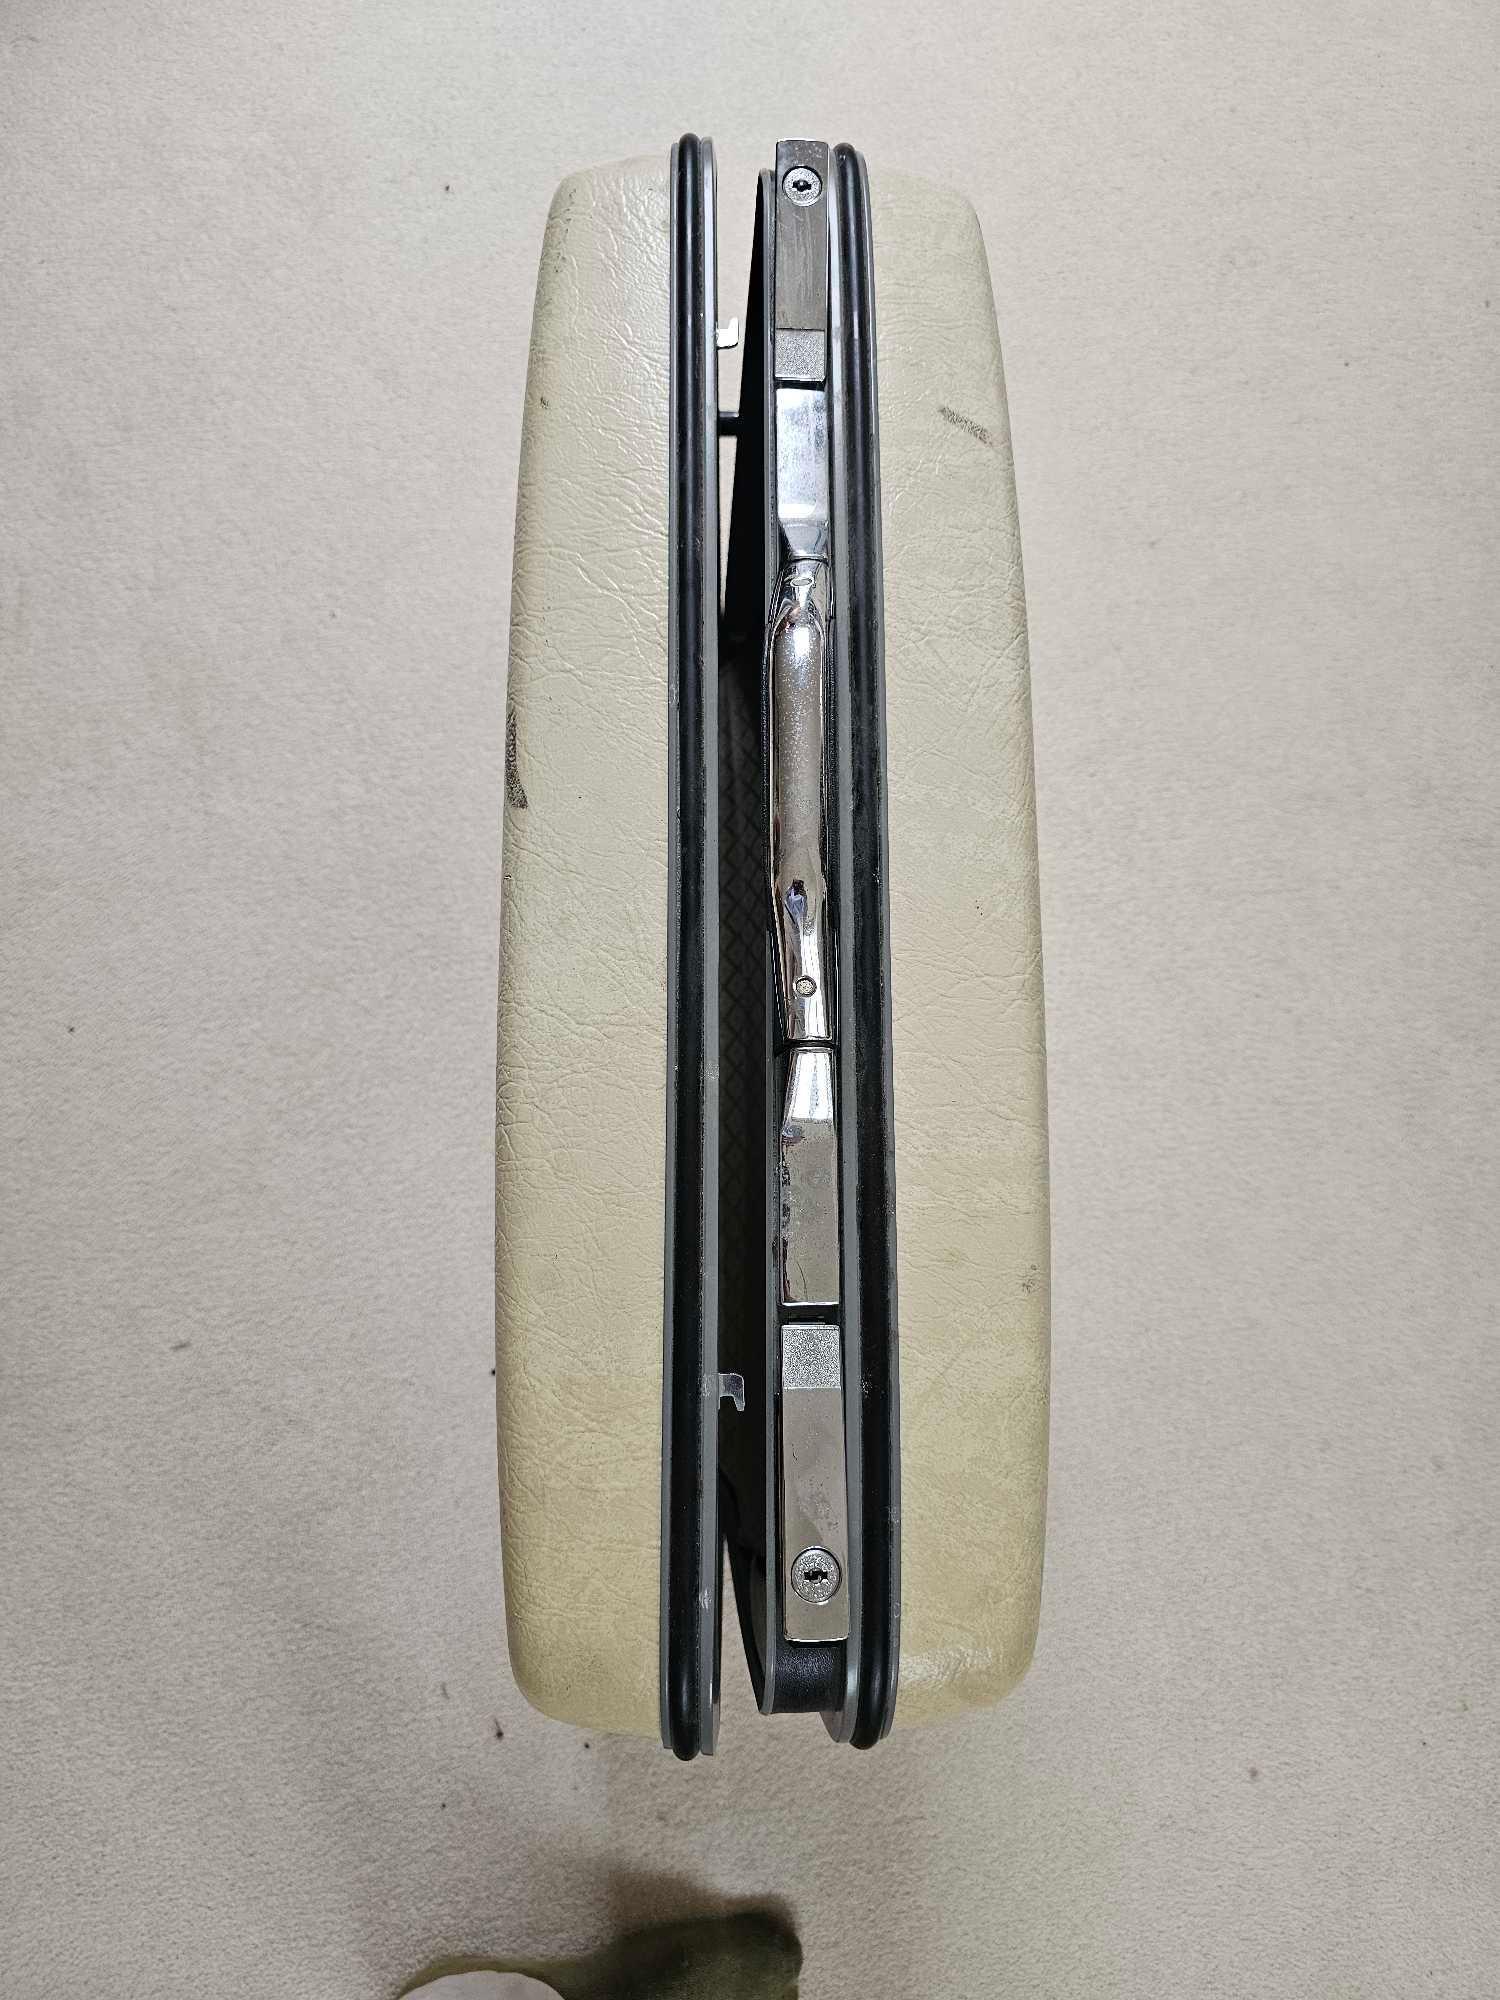 A Vintage 1960s Samsonite Silhouette Hard Shell Luggage Suitcase With Liner Intact - Image 2 of 4